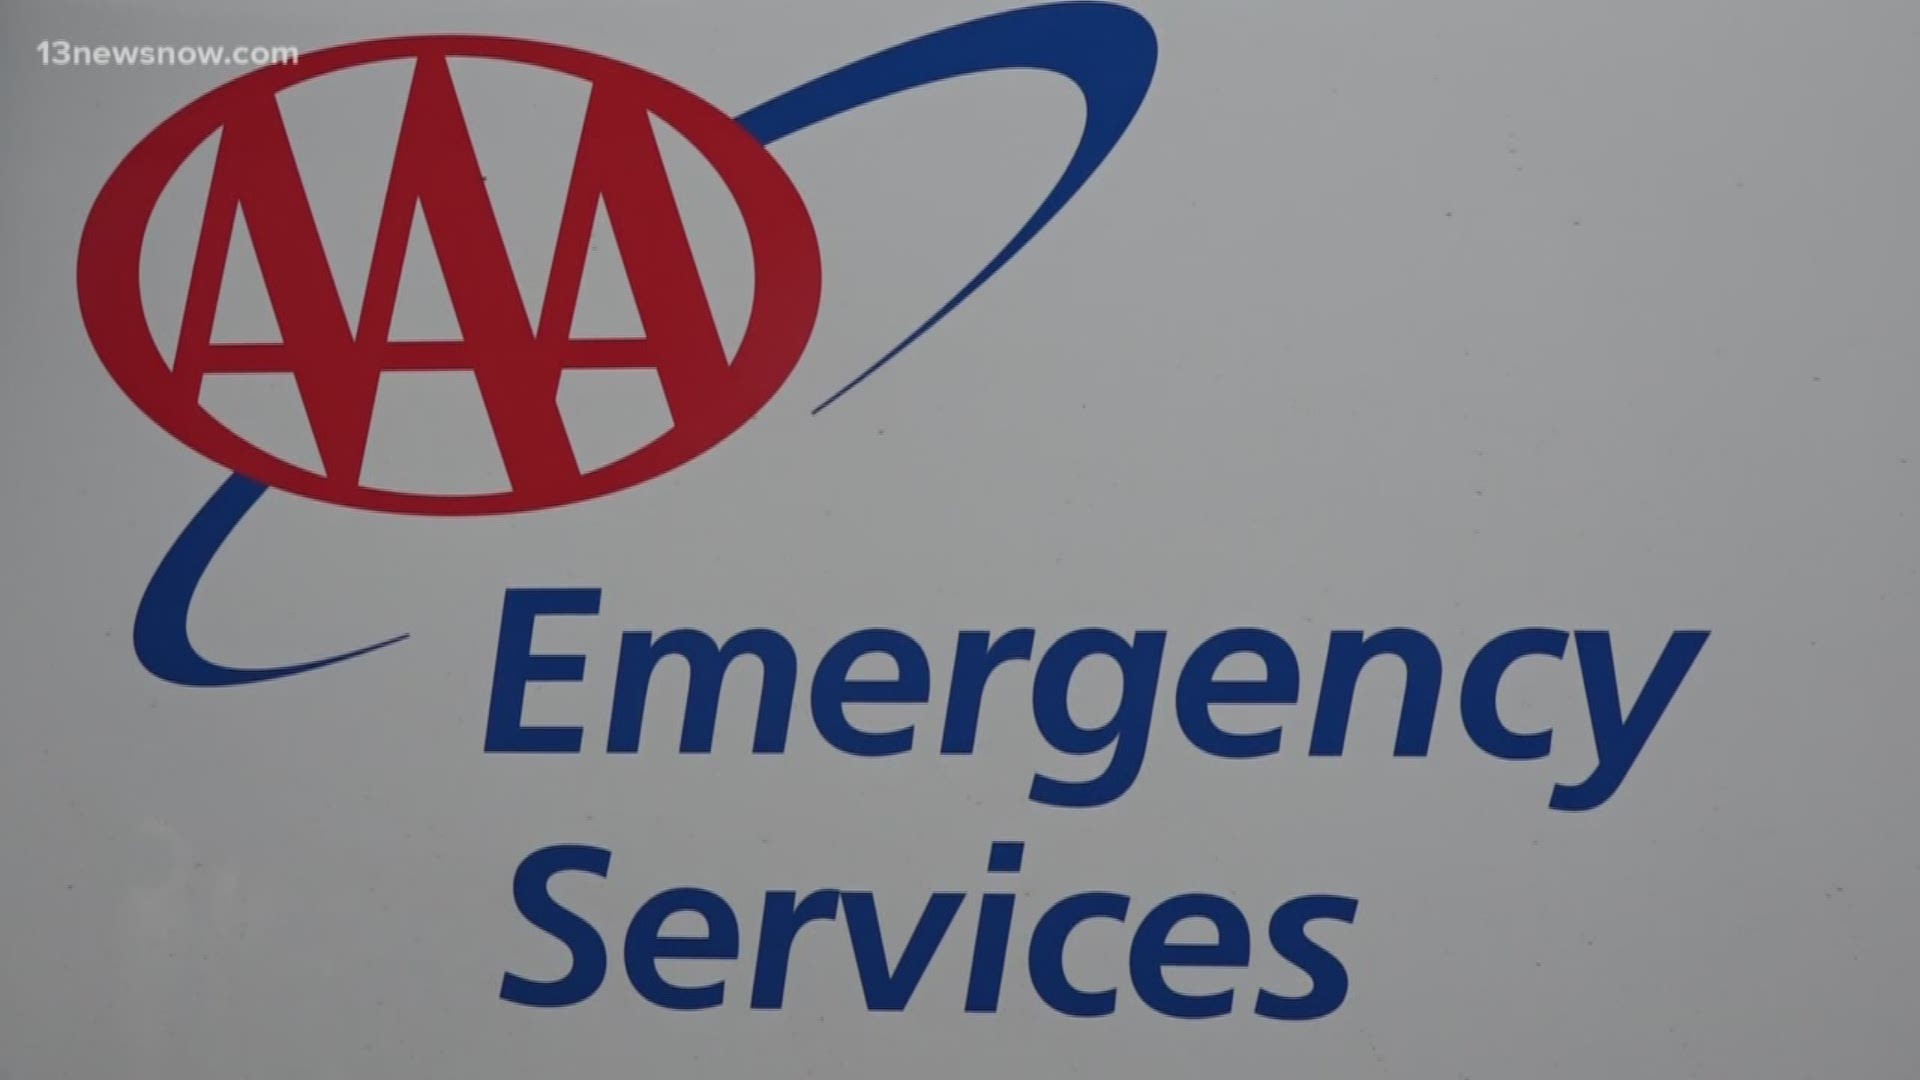 The service is free to everyone, whether or not they're a member of AAA or not. The service is available until 6 a.m. New Year's Day.